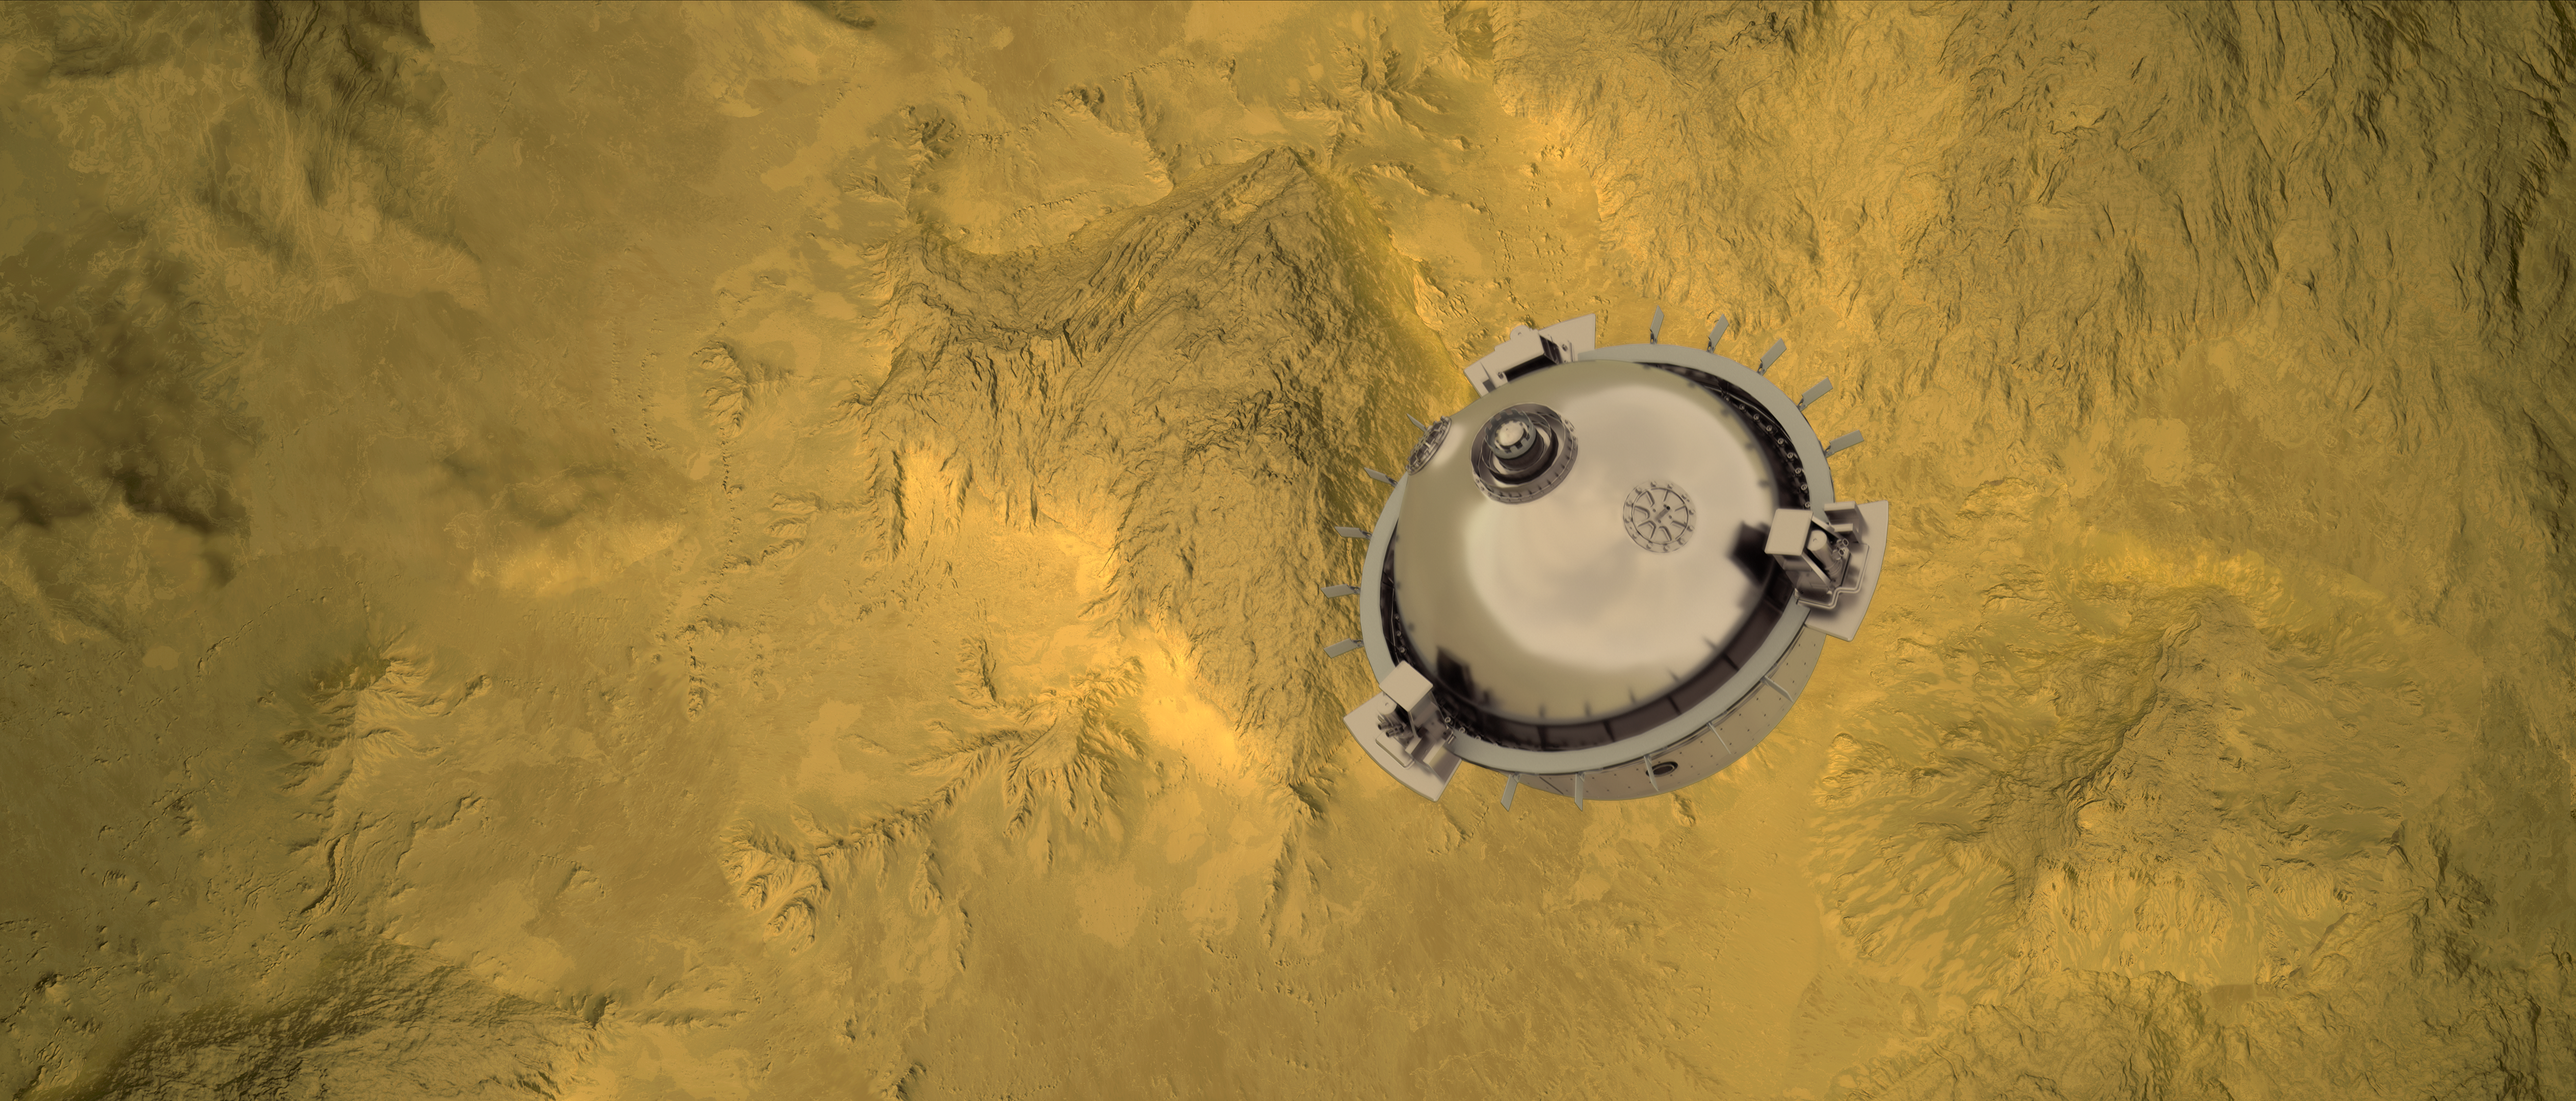 DAVINCI+ will send a meter-diameter probe to brave the high temperatures and pressures near Venus' surface to explore the atmosphere from above the clouds to near the surface of a terrain that may have been a past a continent.